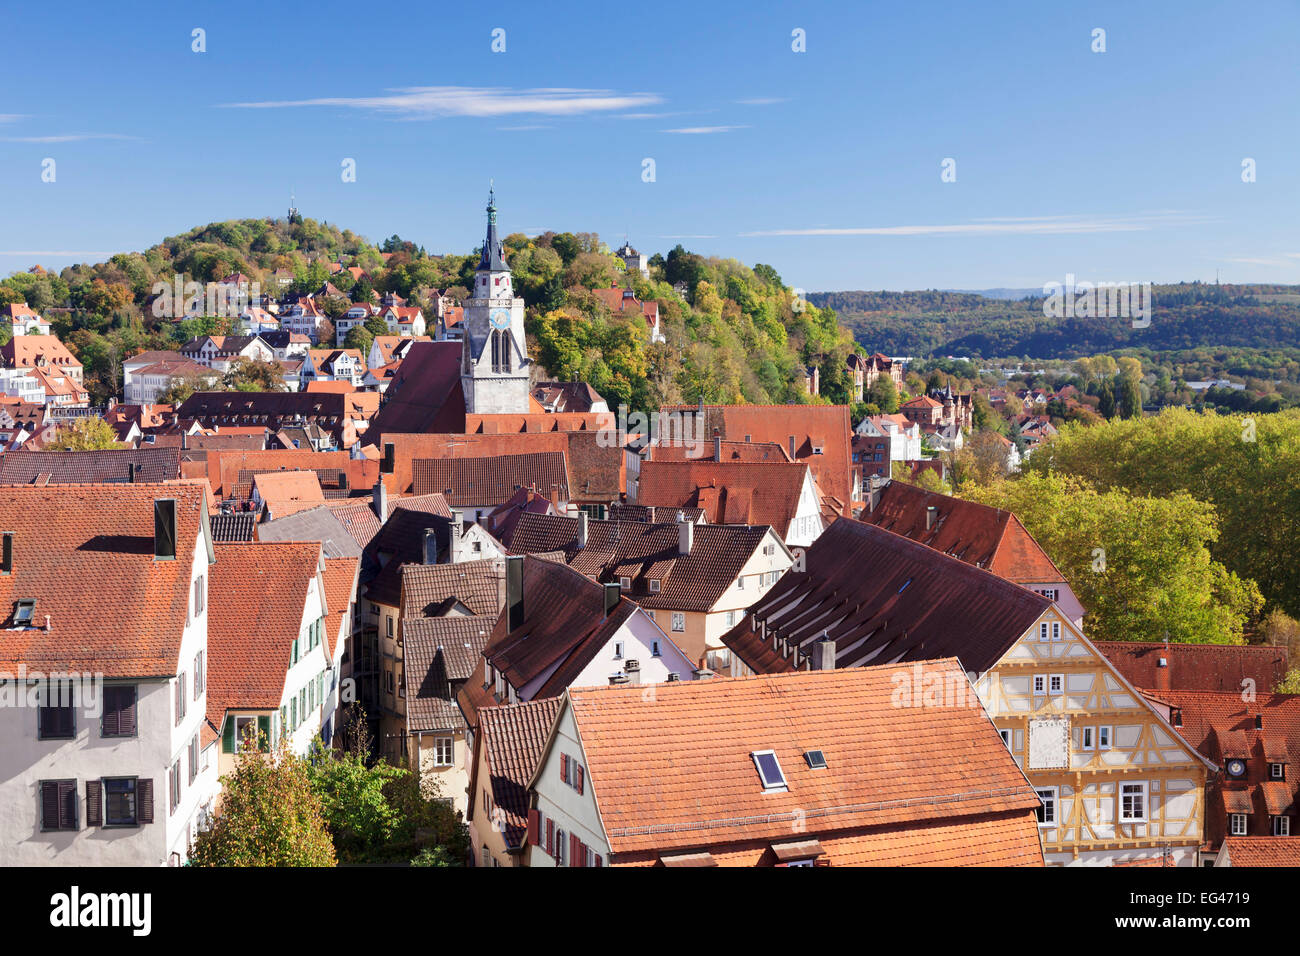 Old town with collegiate church, Tubingen, Baden-Württemberg, Germany Stock Photo